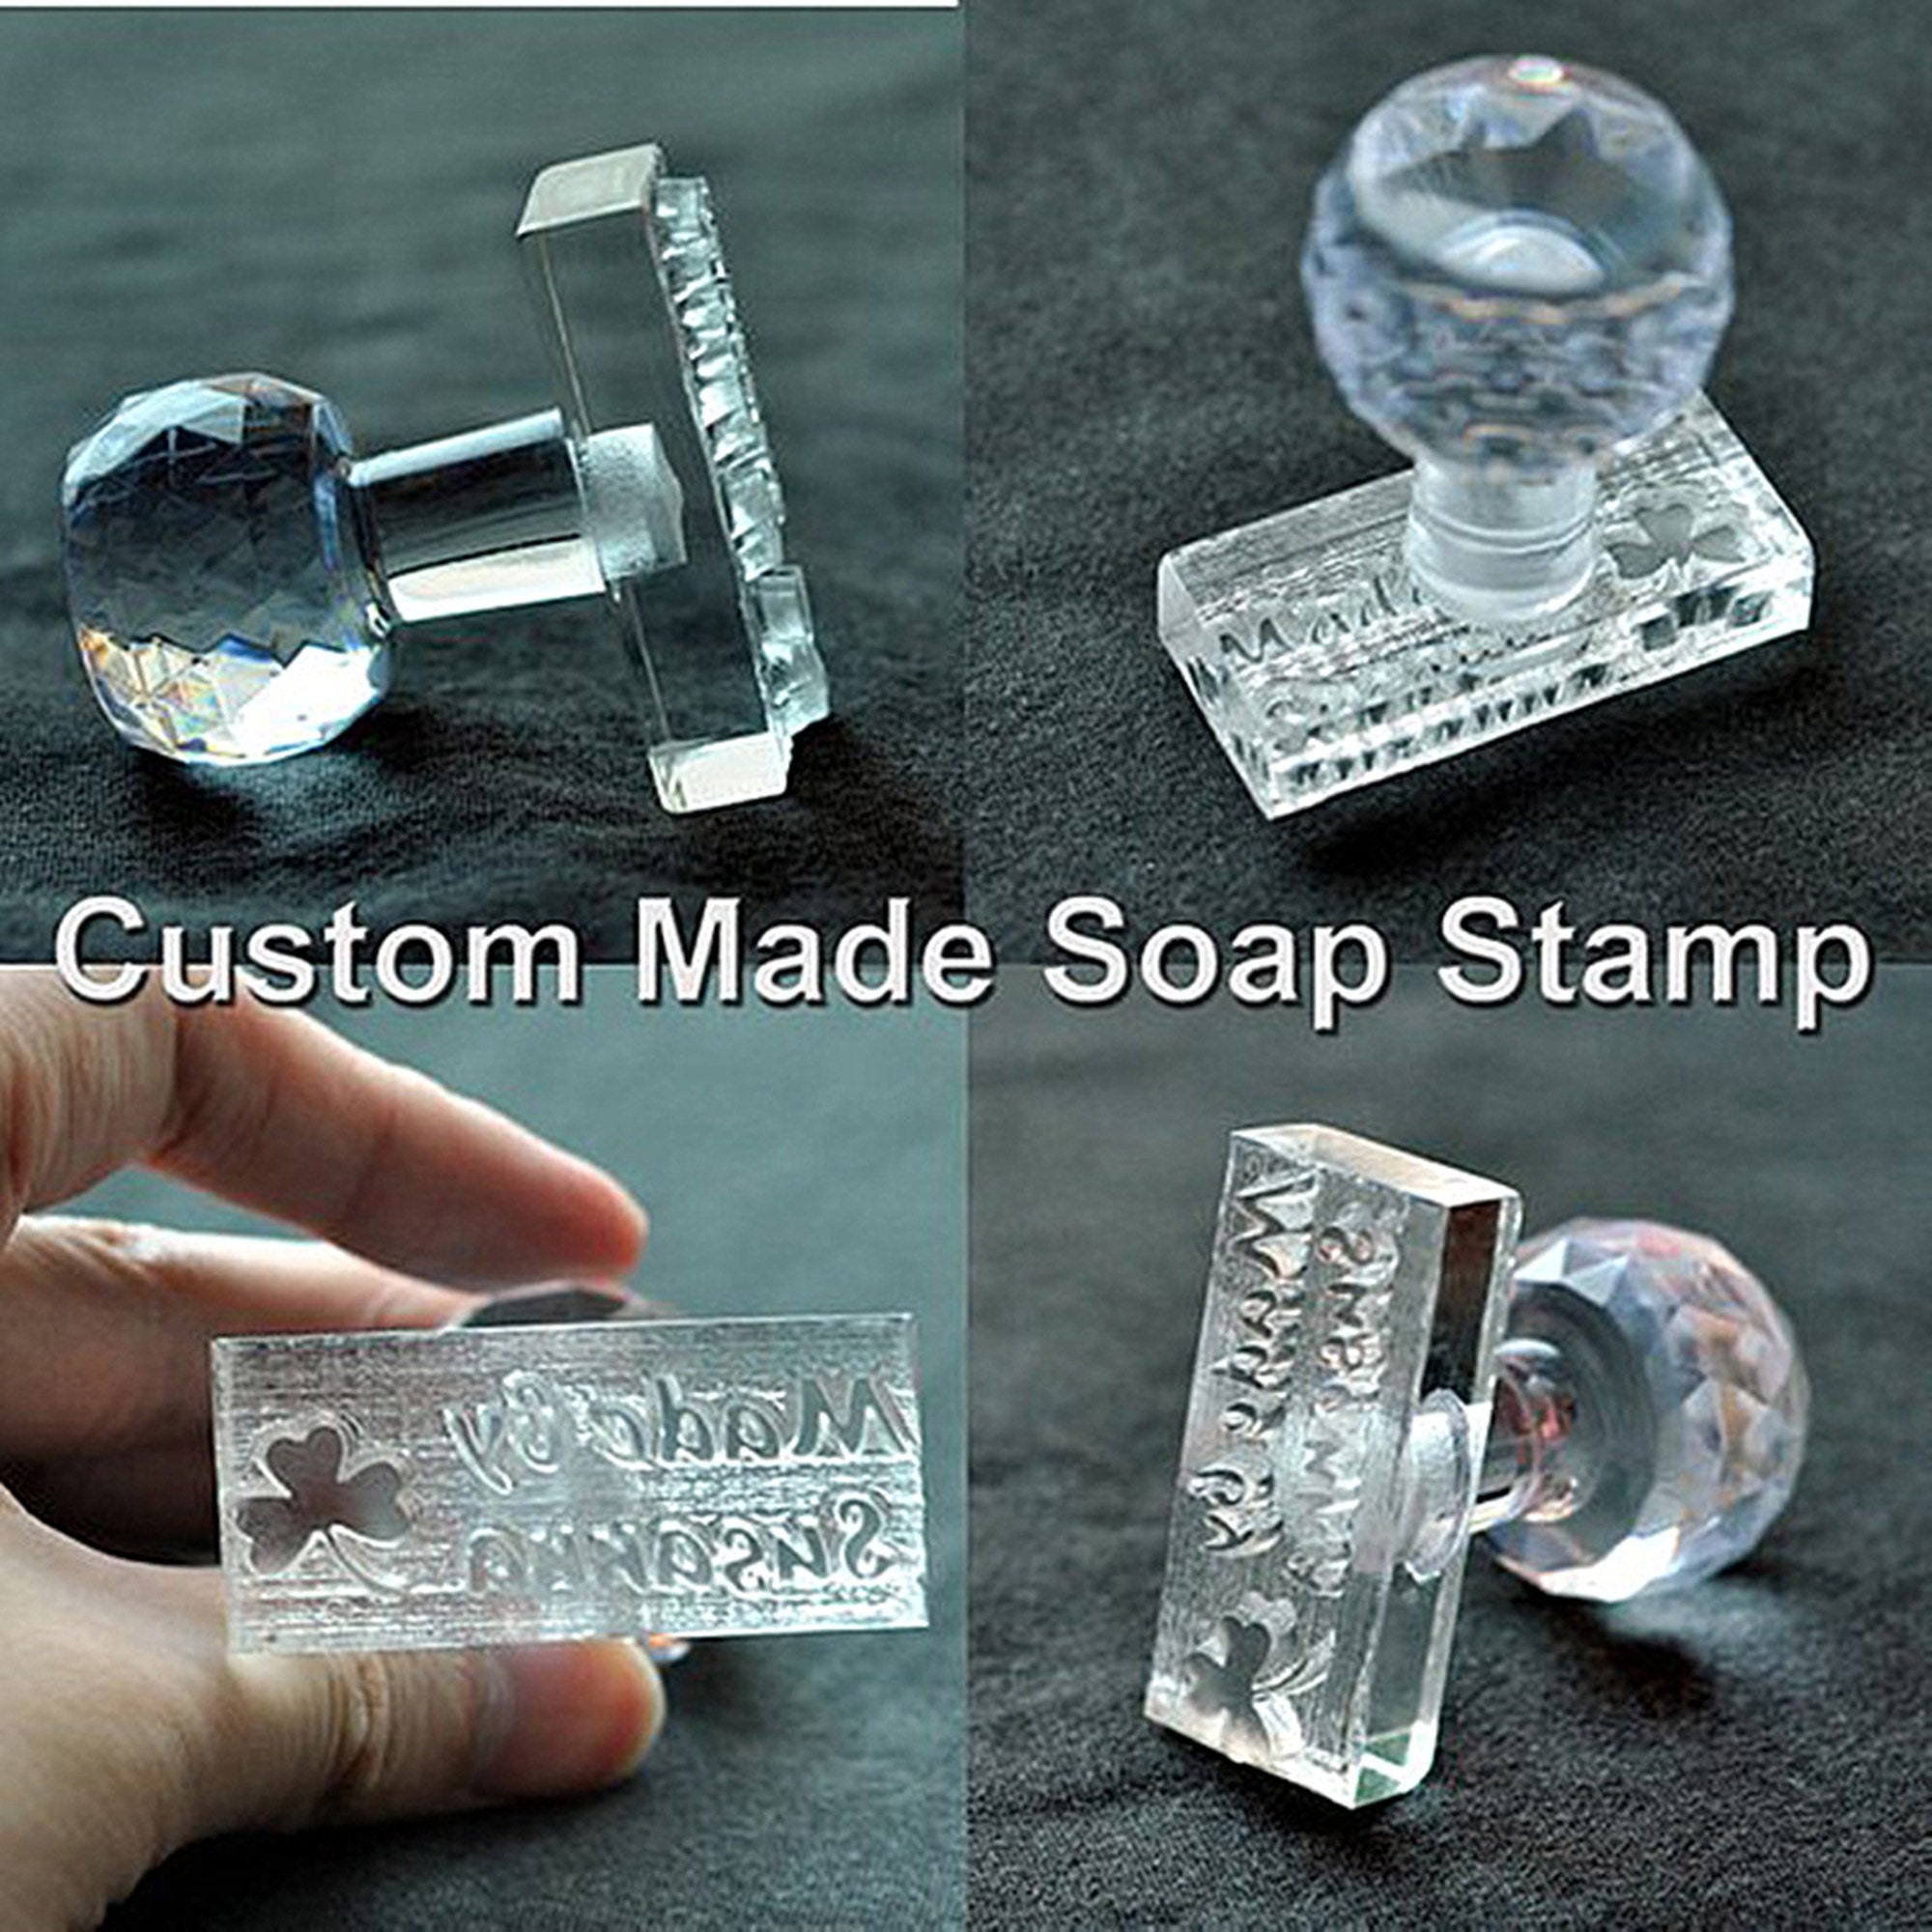 Custom SOAP Stamp LOGO, Natural Cosmetics Lover Gift, Cold Process Soap  Stamp, Acrylic Stamp, Artisan Makers Mark, Organic Bar Stamp, Tools 